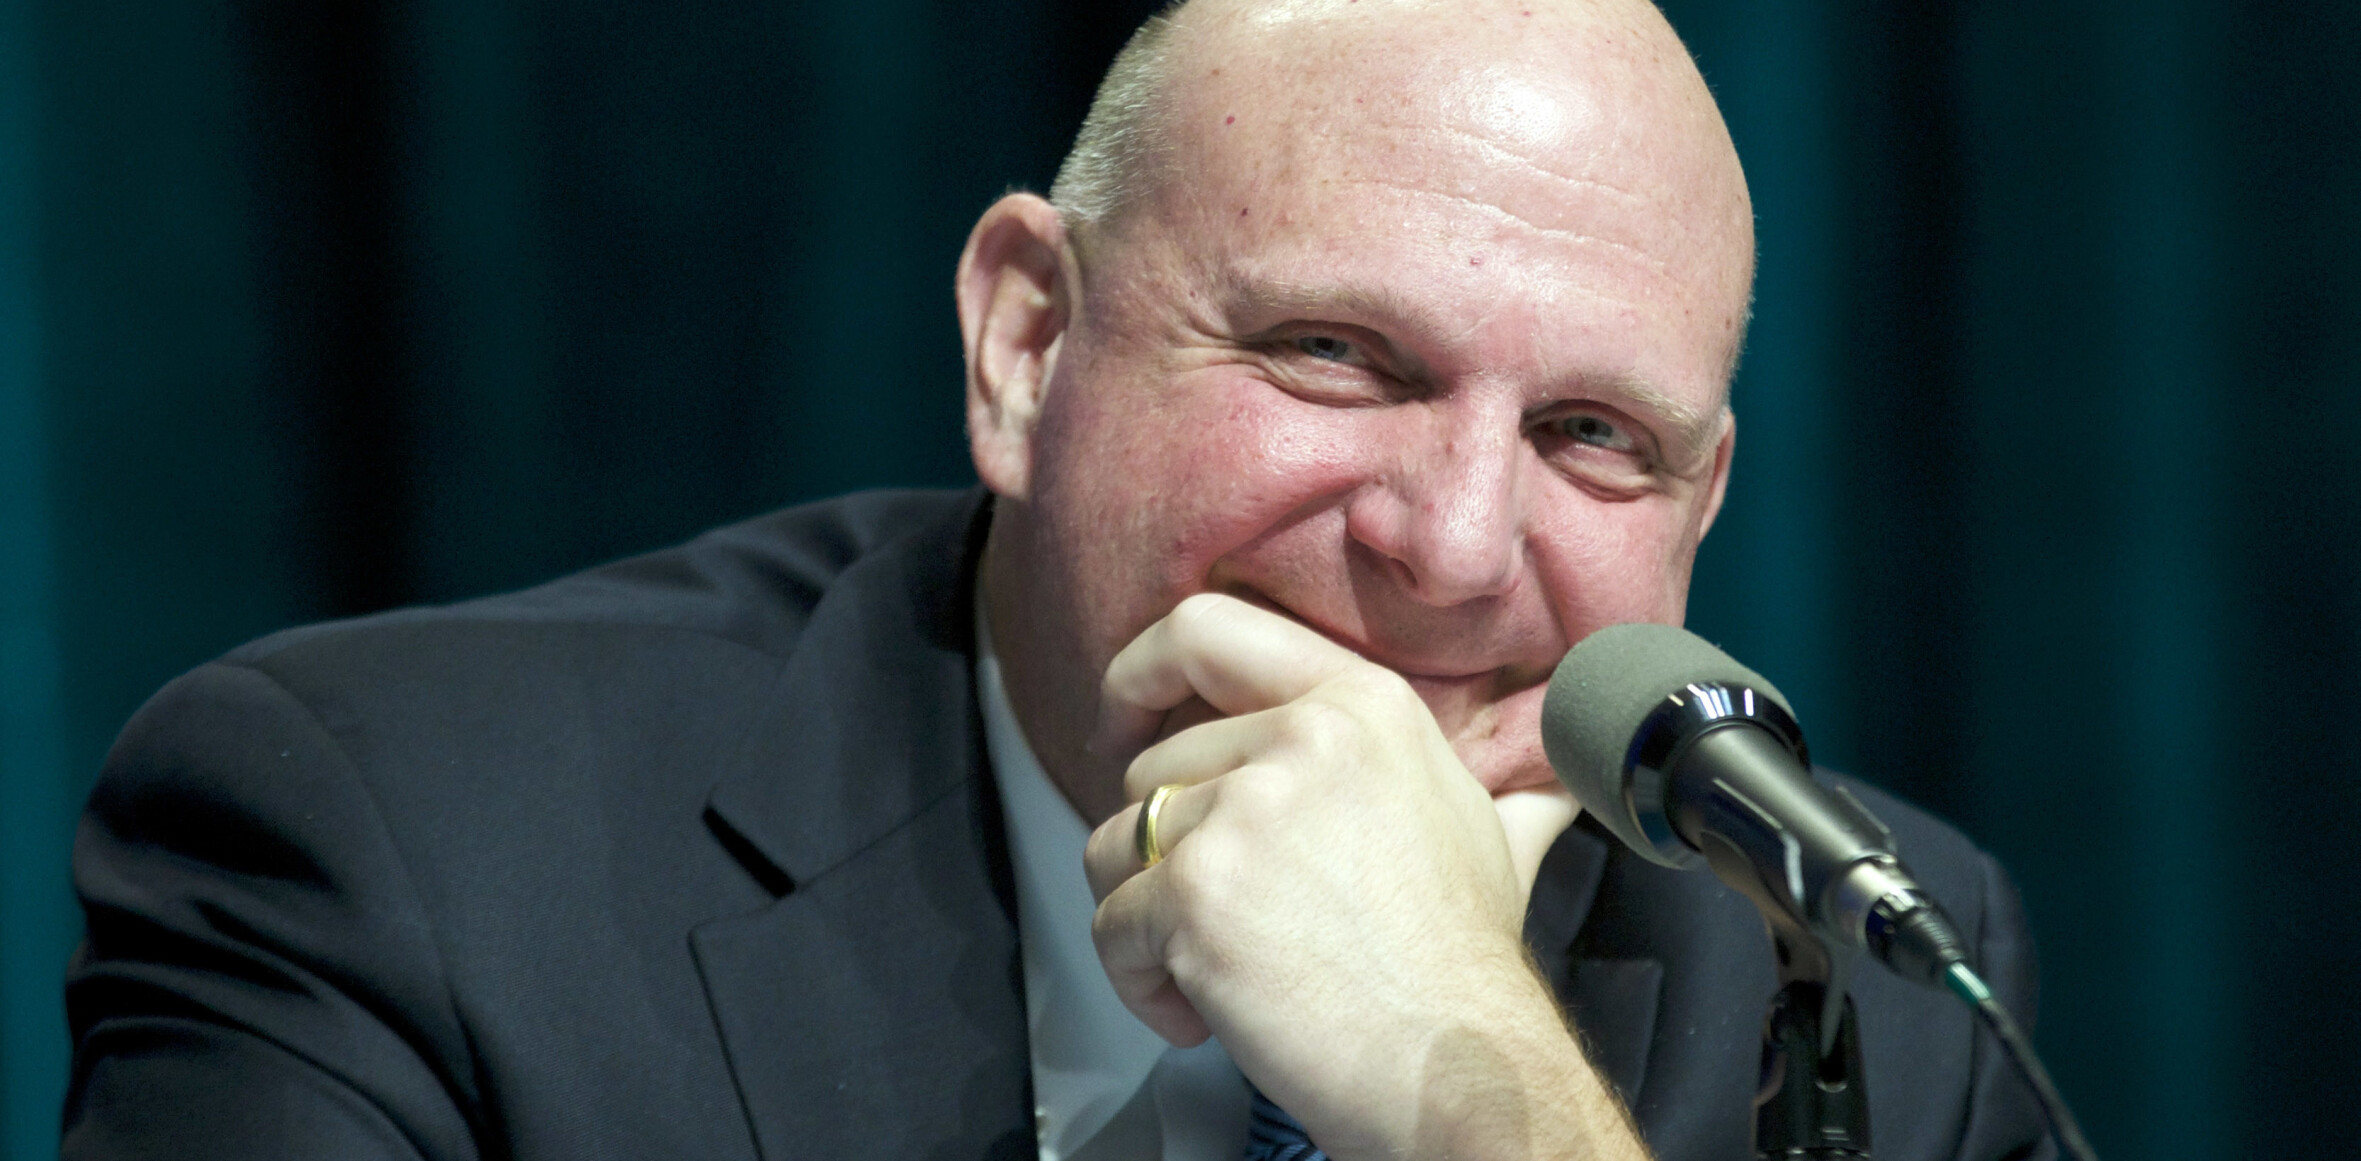 Microsoft expects to find a replacement for outgoing CEO Steve Ballmer by early 2014